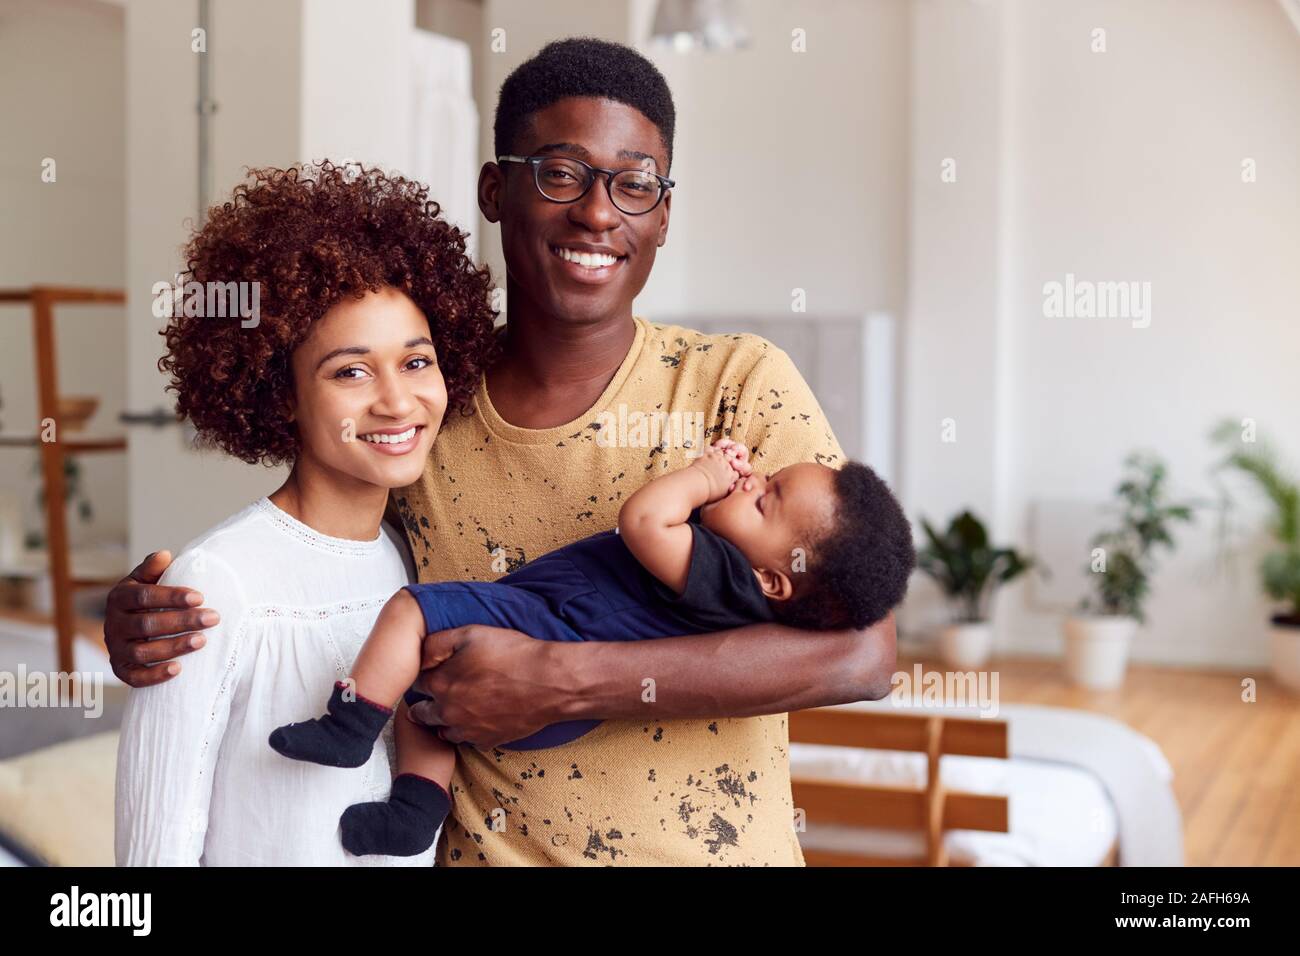 Portrait Of Loving Parents Holding Newborn Baby At Home In Loft Apartment Stock Photo